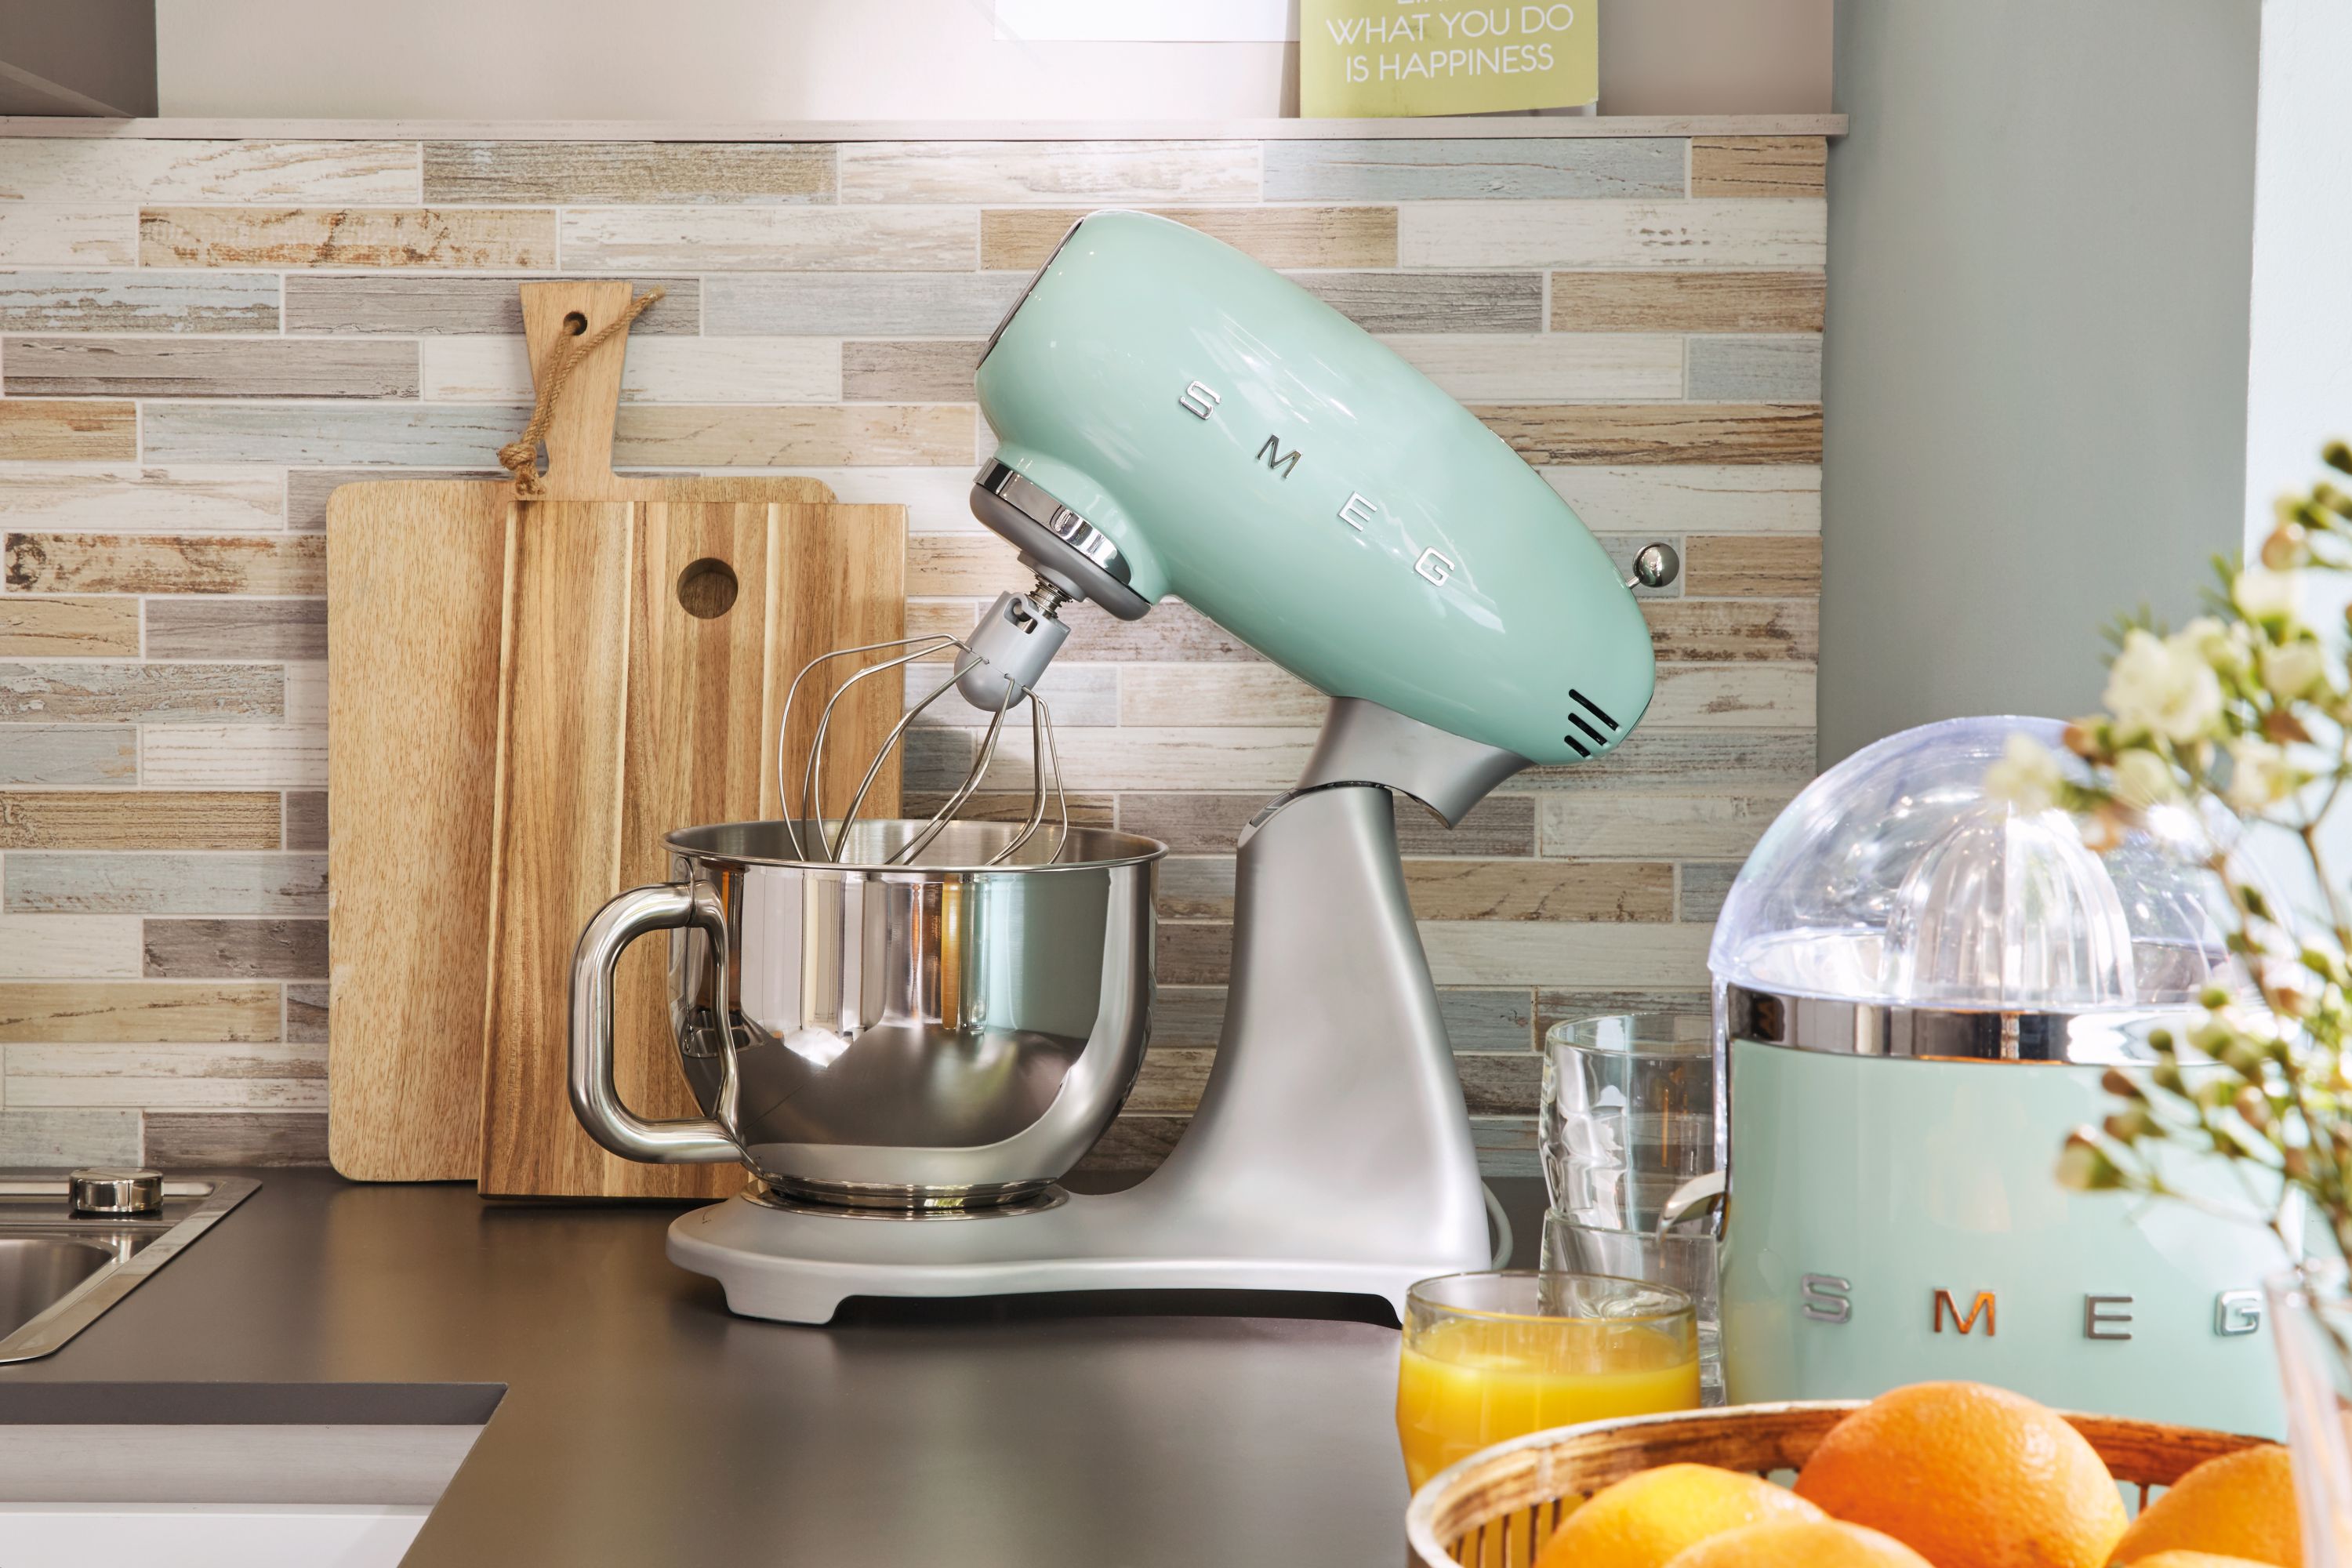 Smeg Retro Style Stand Mixer: Stylish Design and Reliable Performance